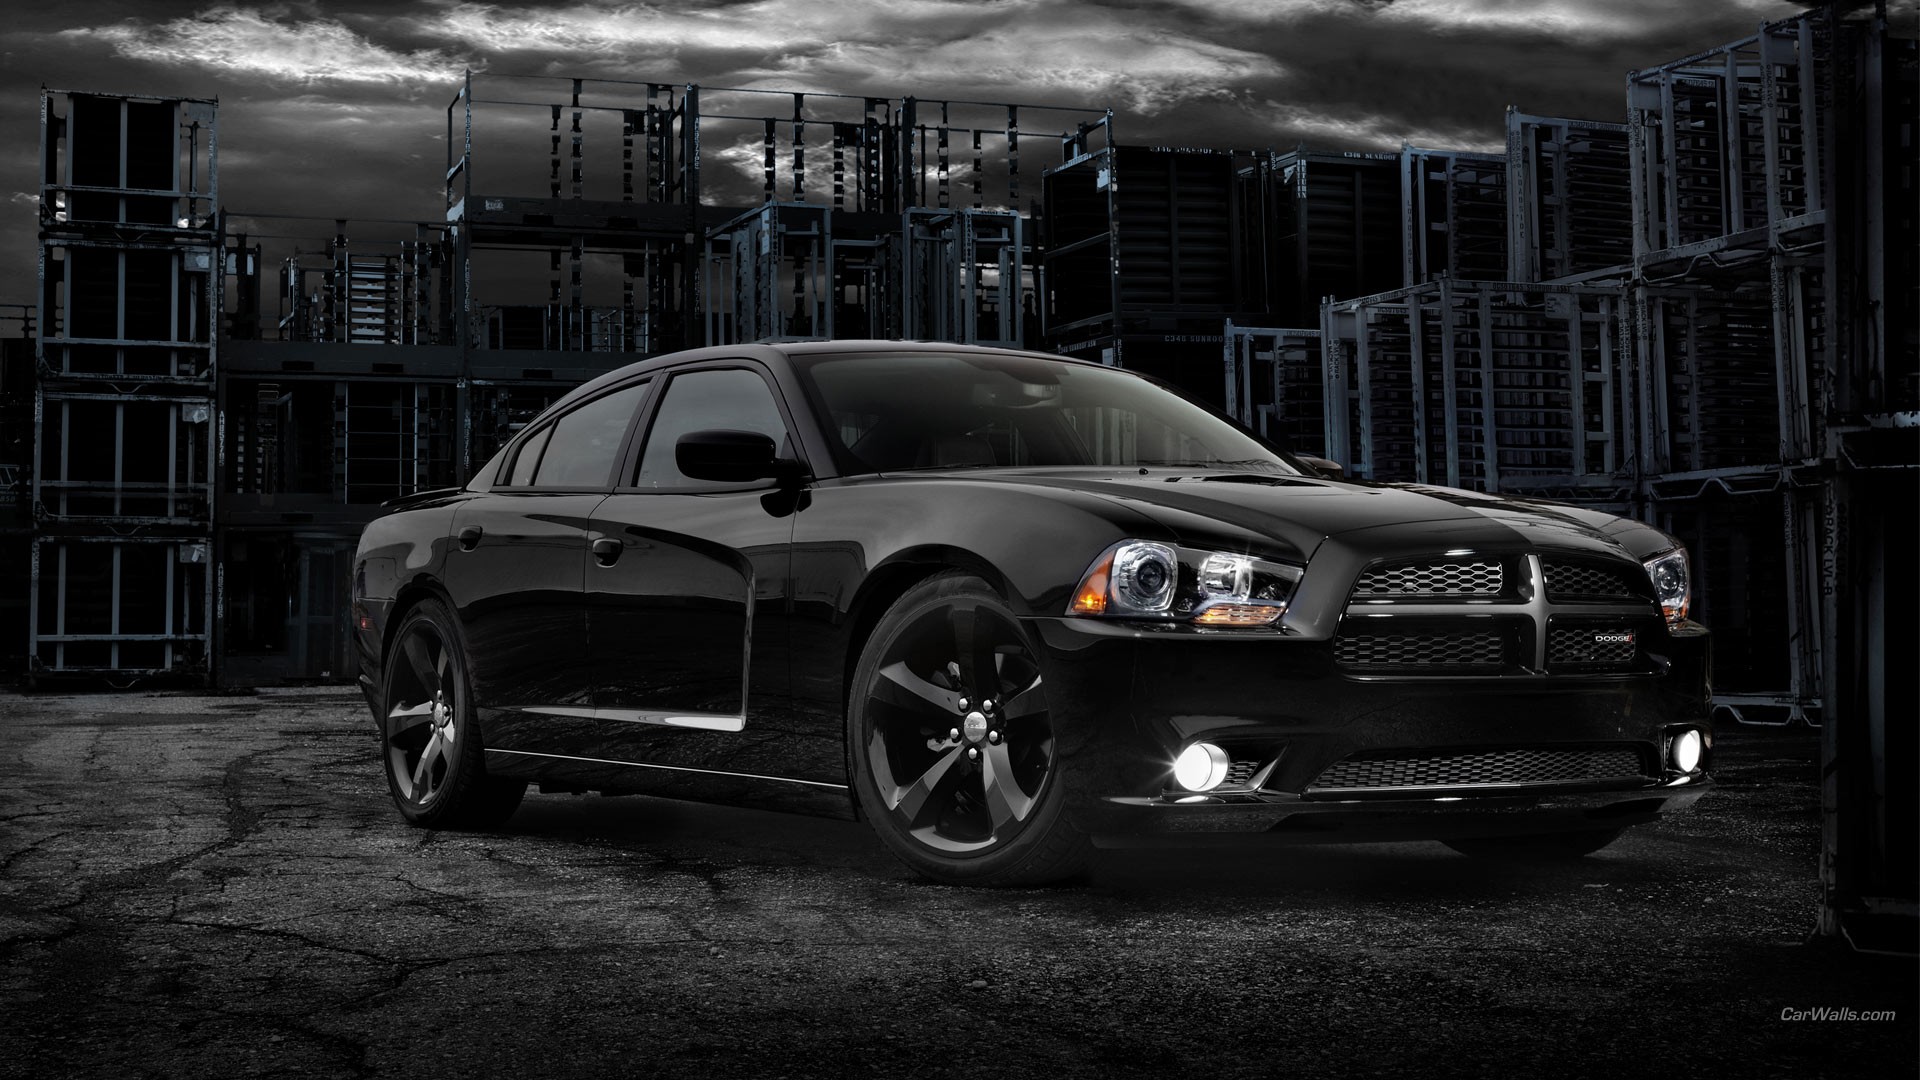 General 1920x1080 Dodge Charger Dodge black cars car vehicle muscle cars American cars Stellantis